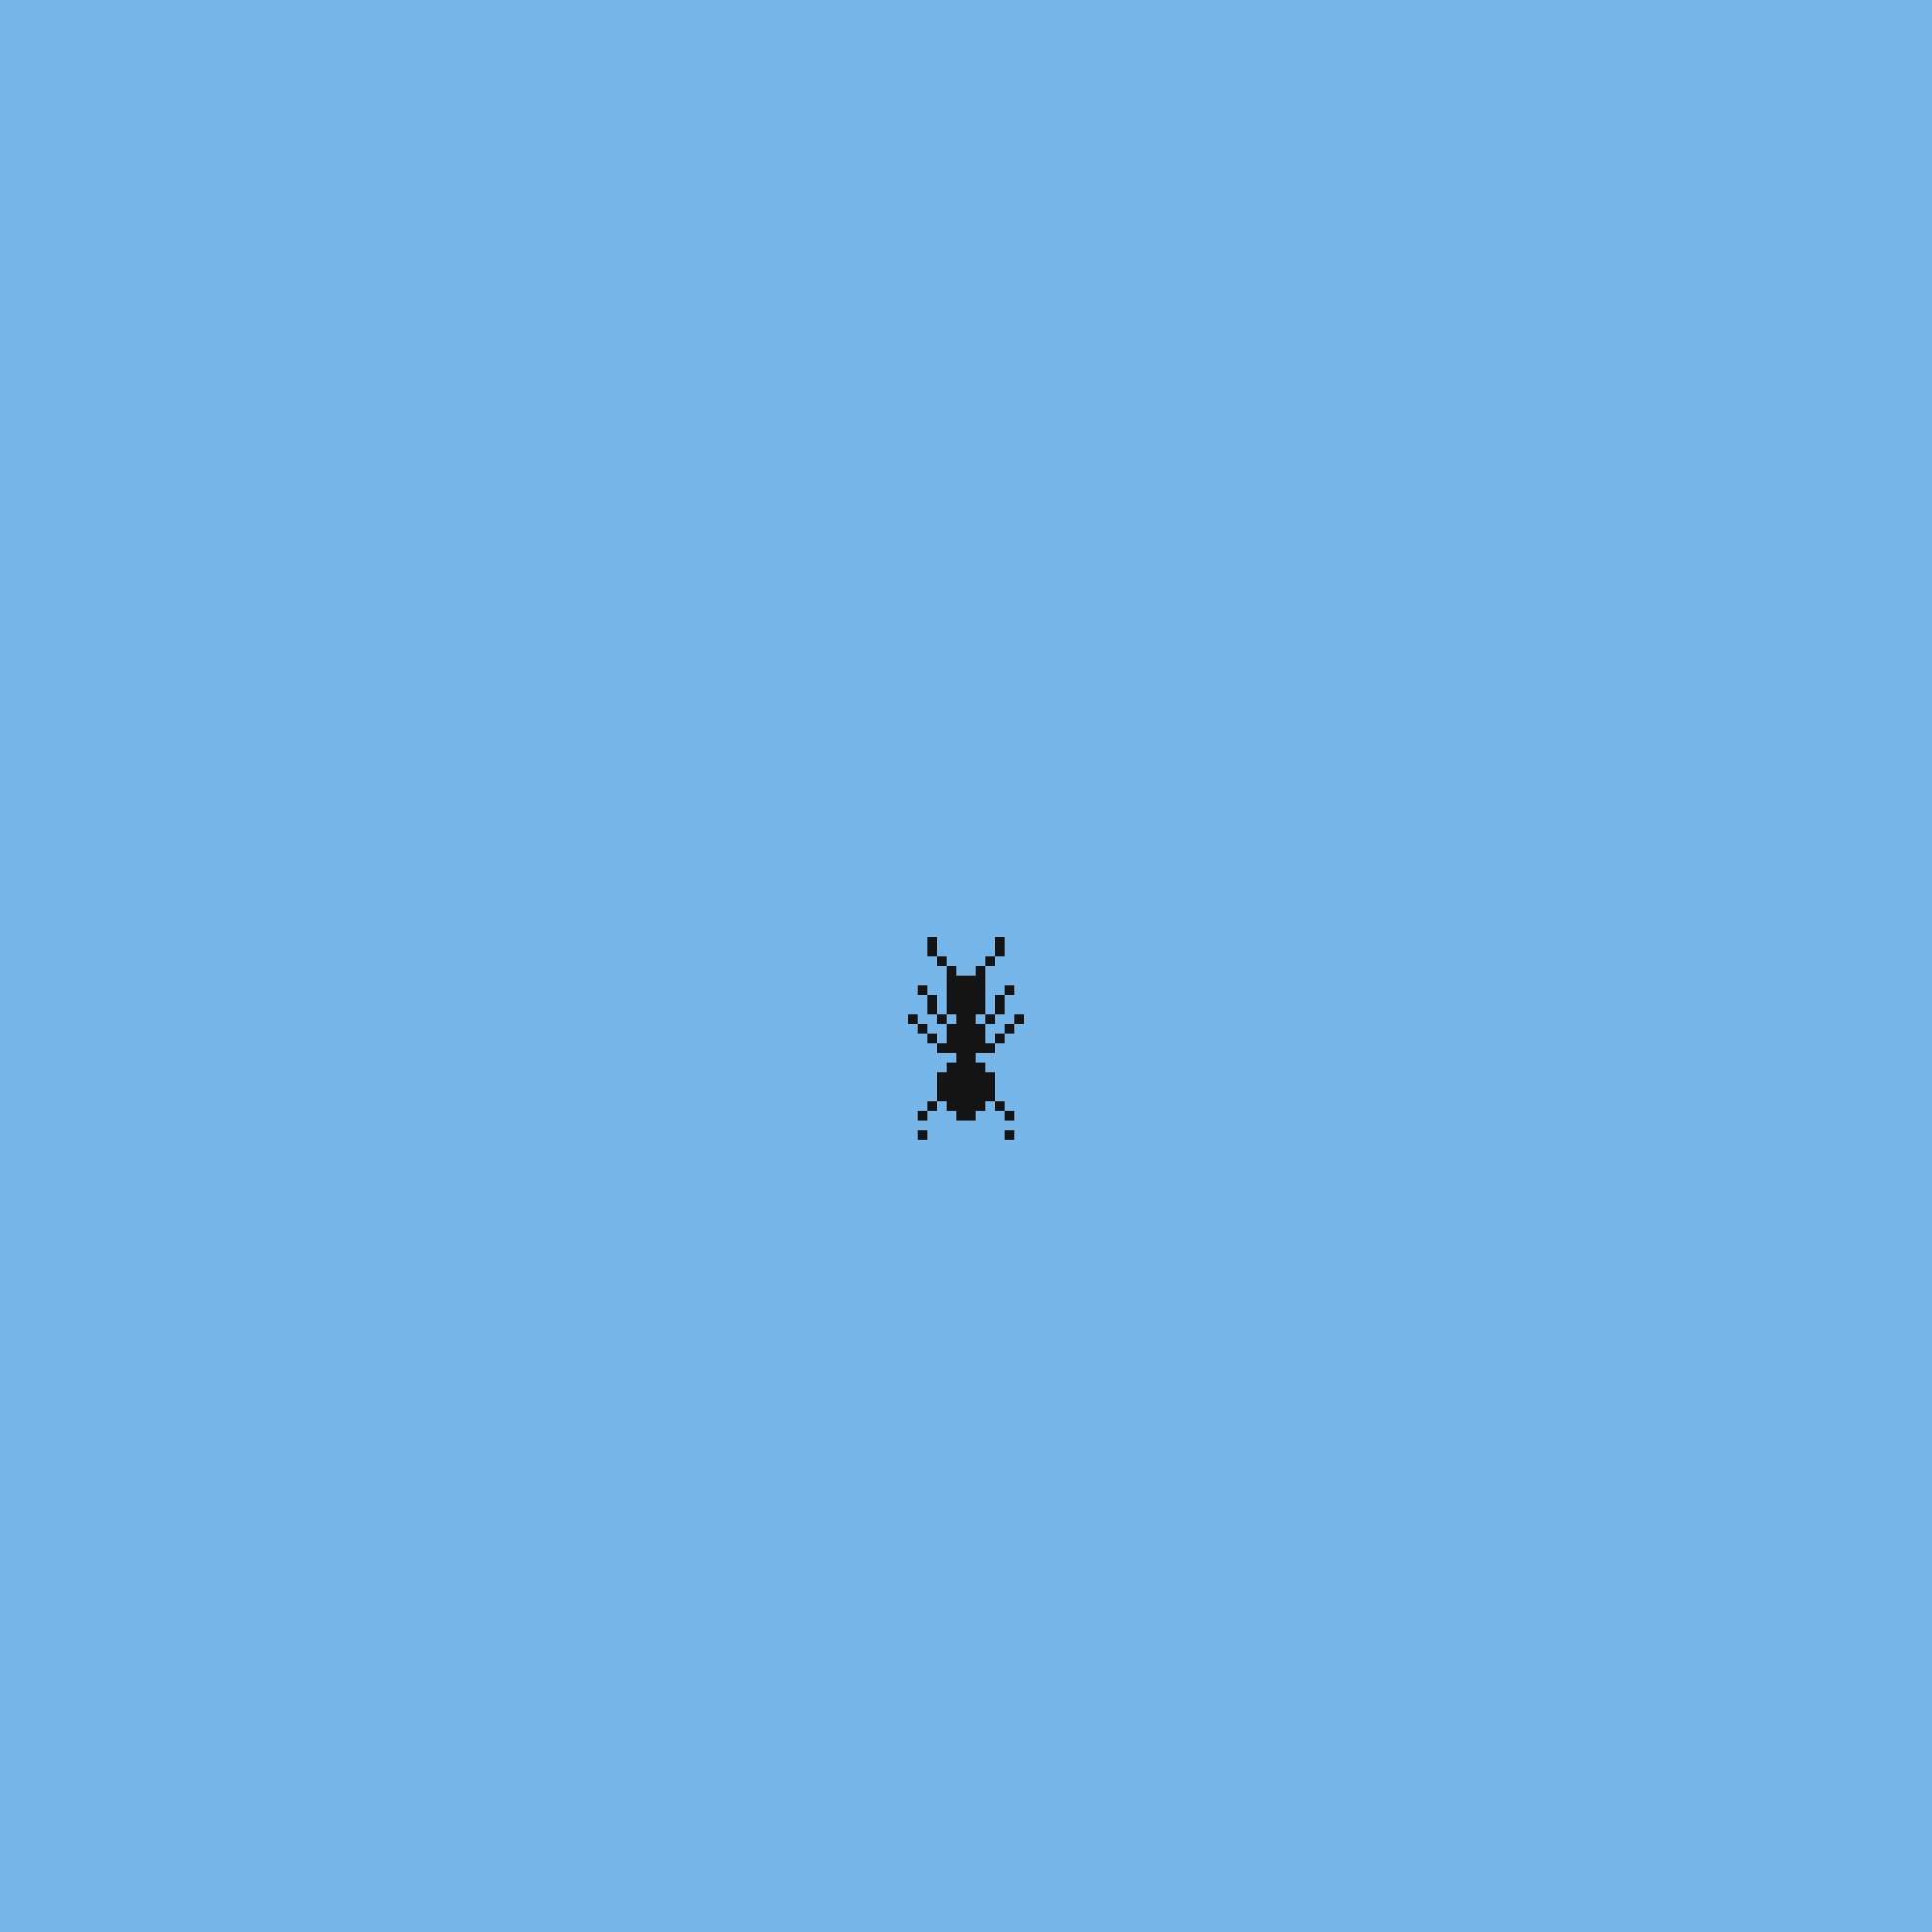 A Boring Ant